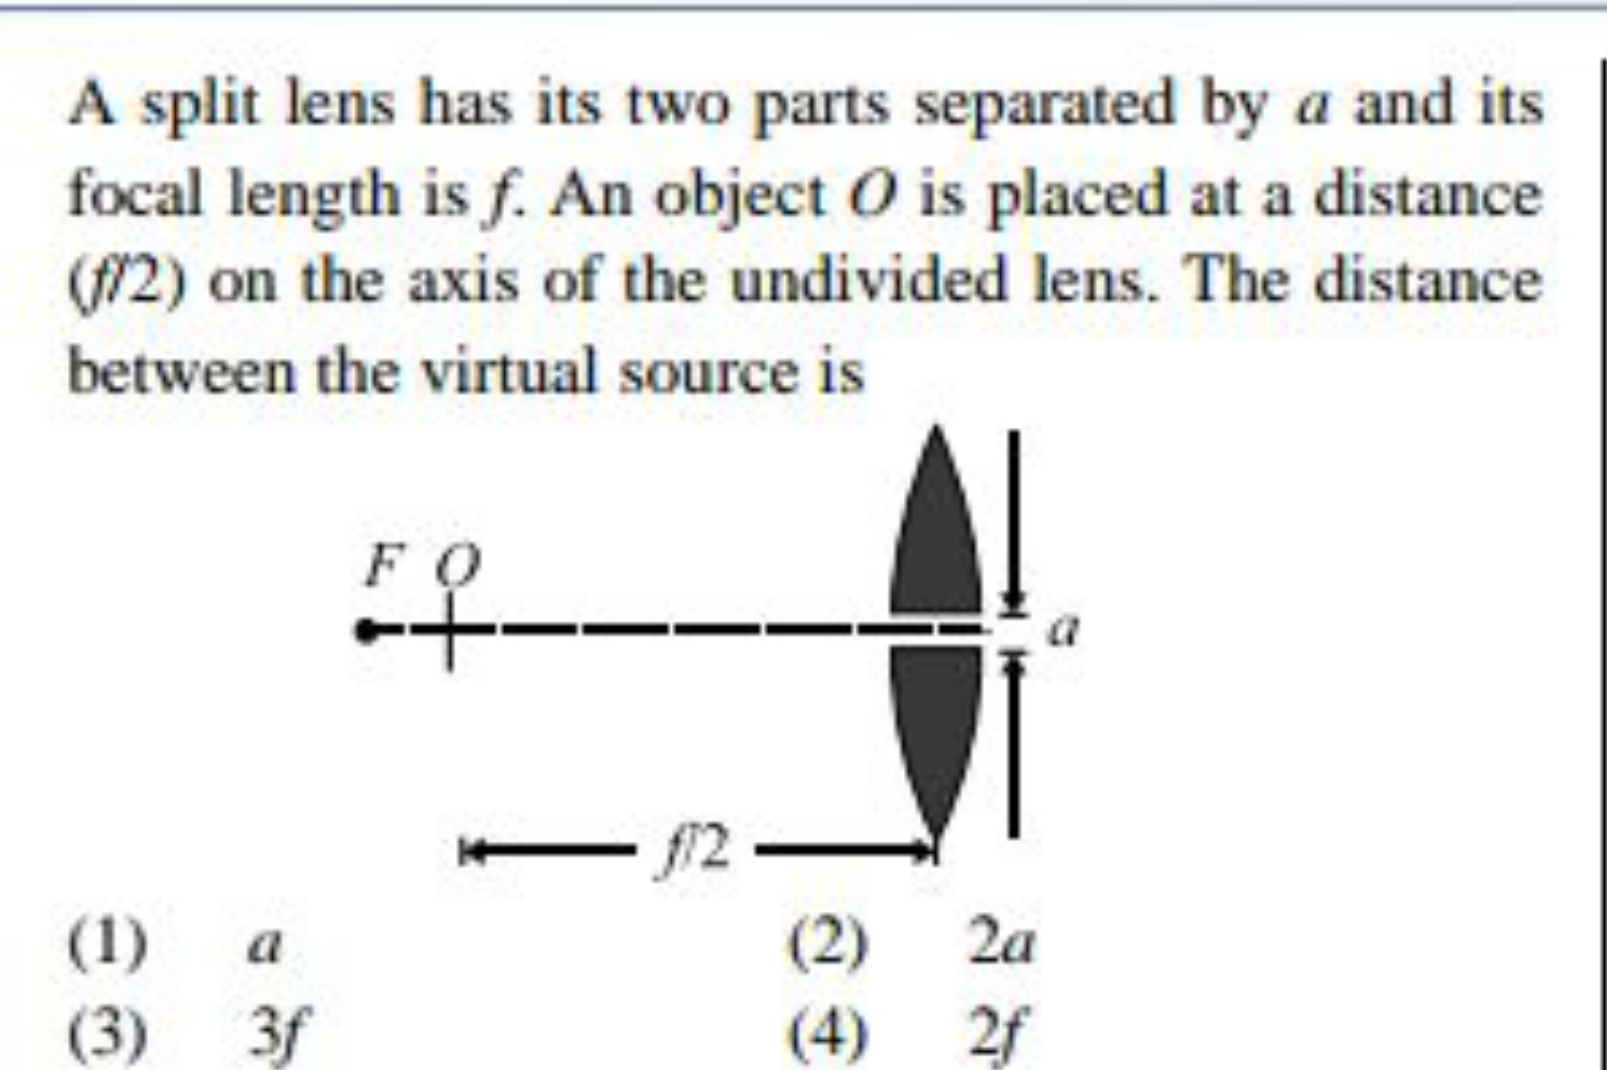 A split lens has its two parts separated by a and its focal length is 